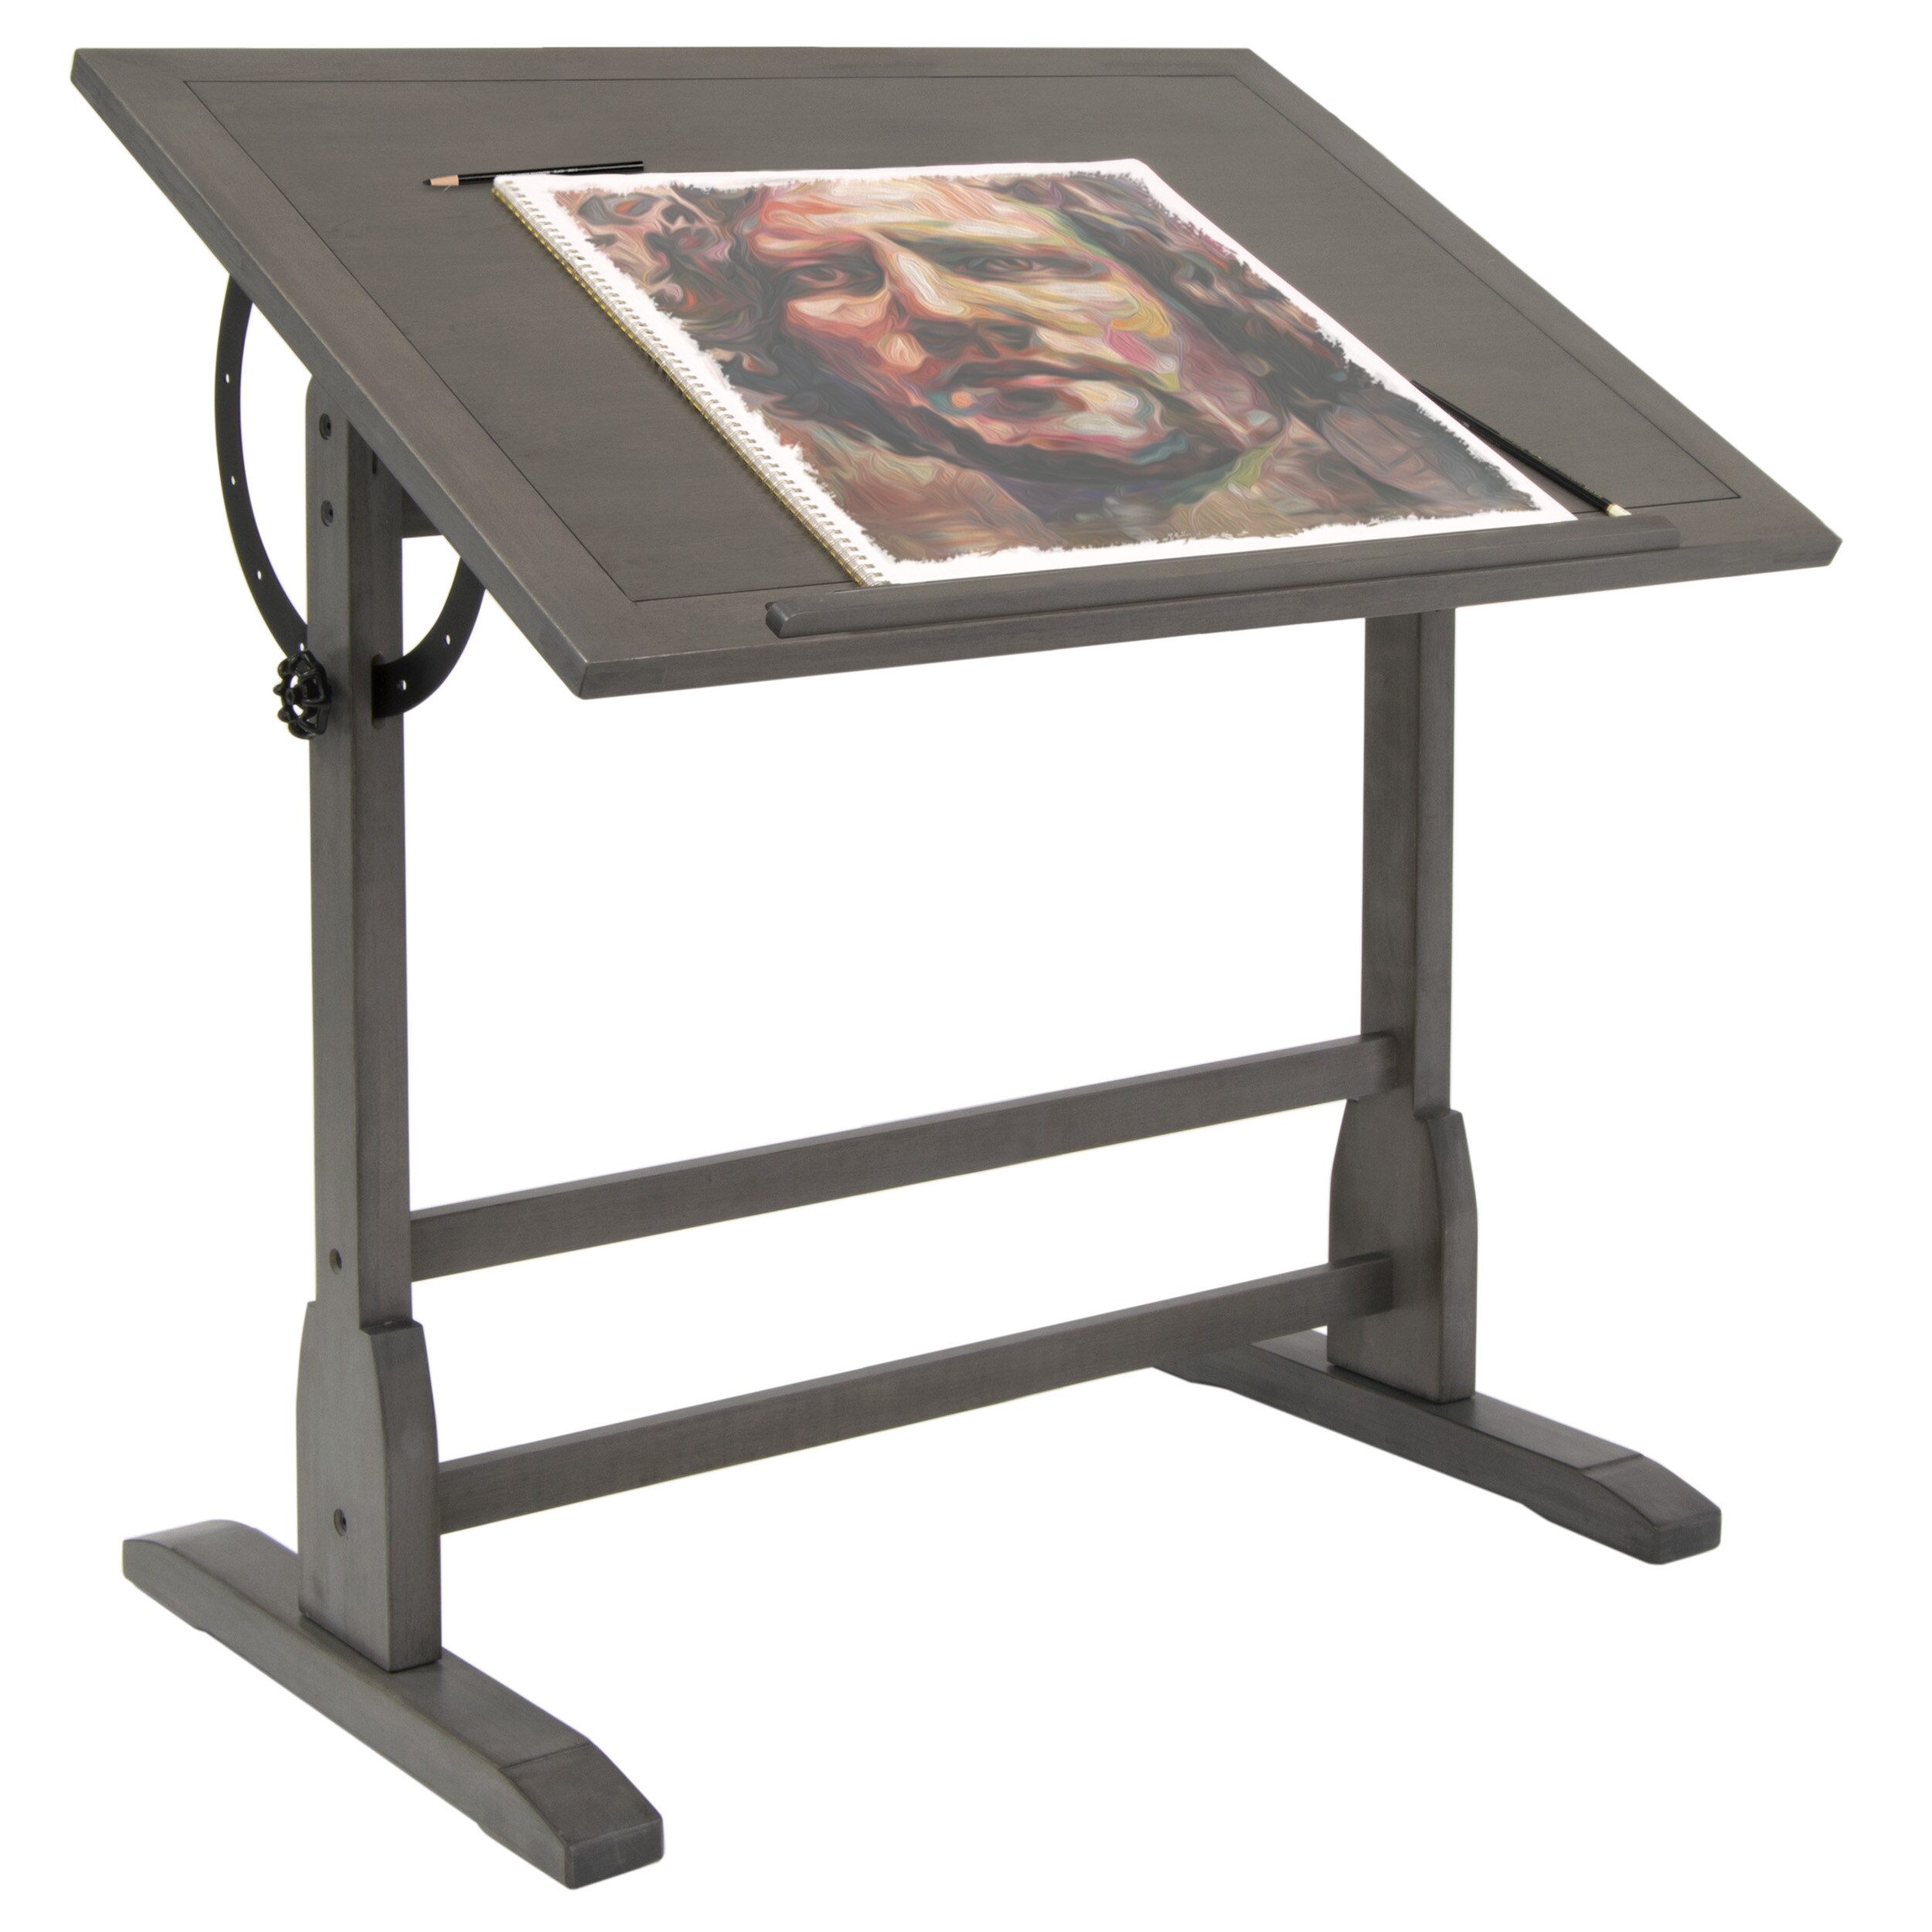 Studio Designs 36-inch Vintage Wood Drafting Table with Angle Adjustable  Top for Drawing - Bed Bath & Beyond - 7824970